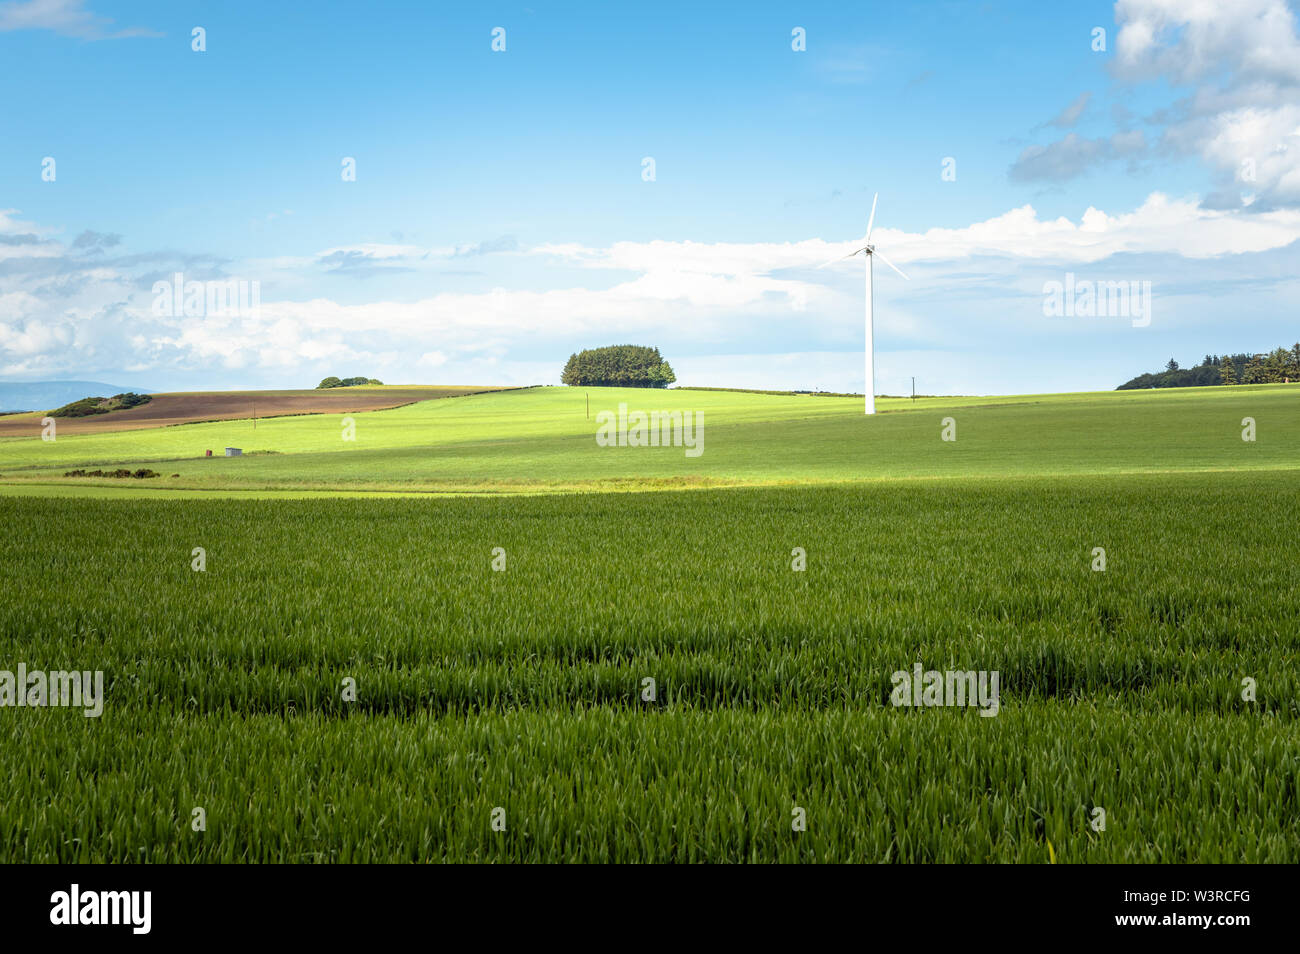 Wind turbine in a rolling rural landscape under blue sky with clouds Stock Photo